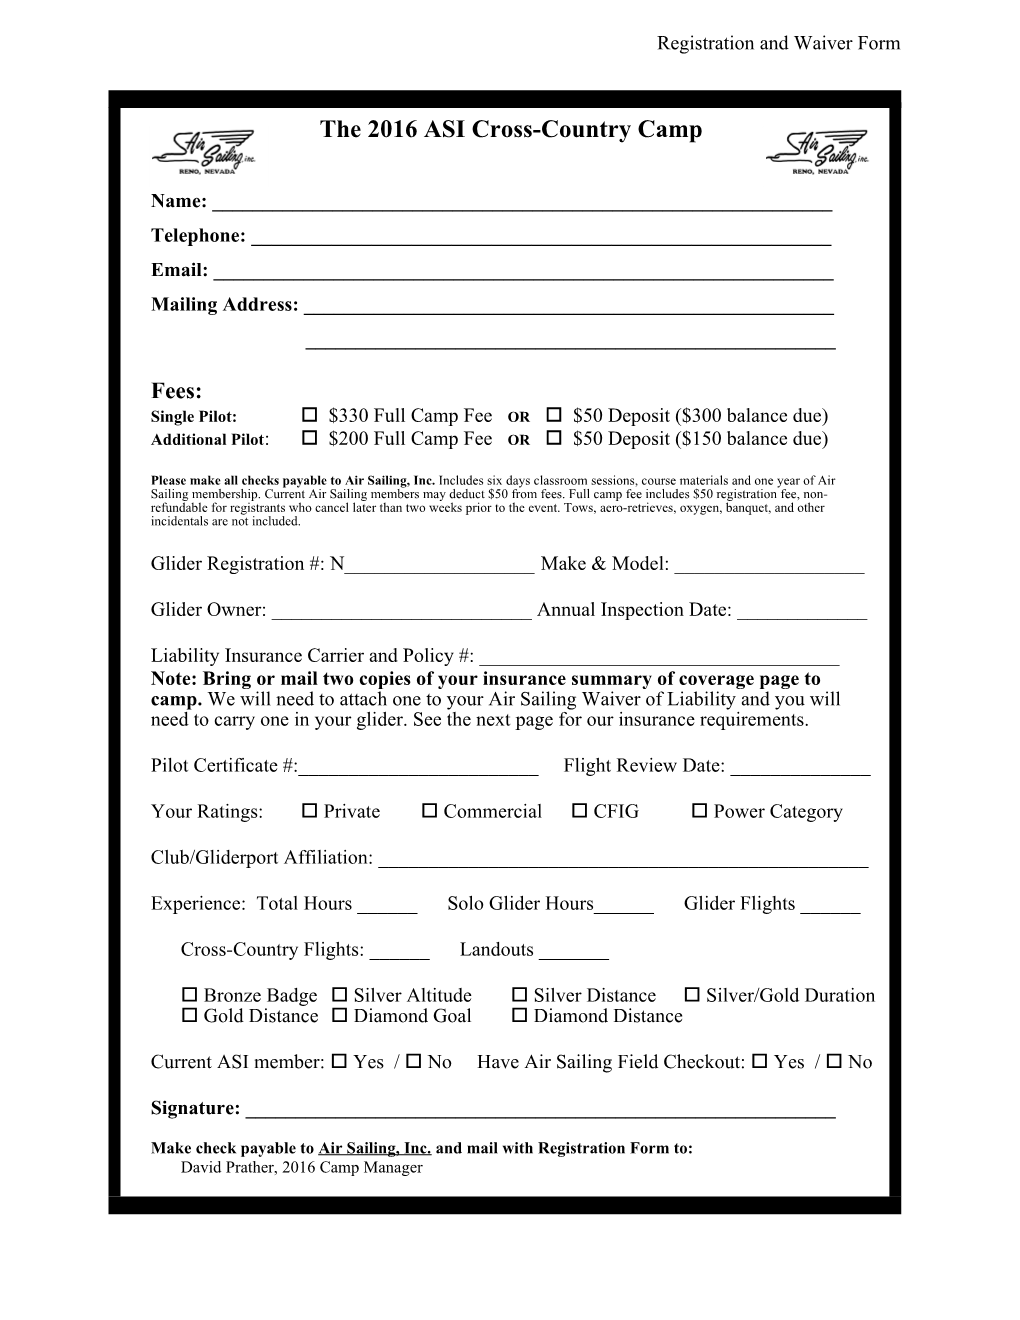 Registration and Waiver Form